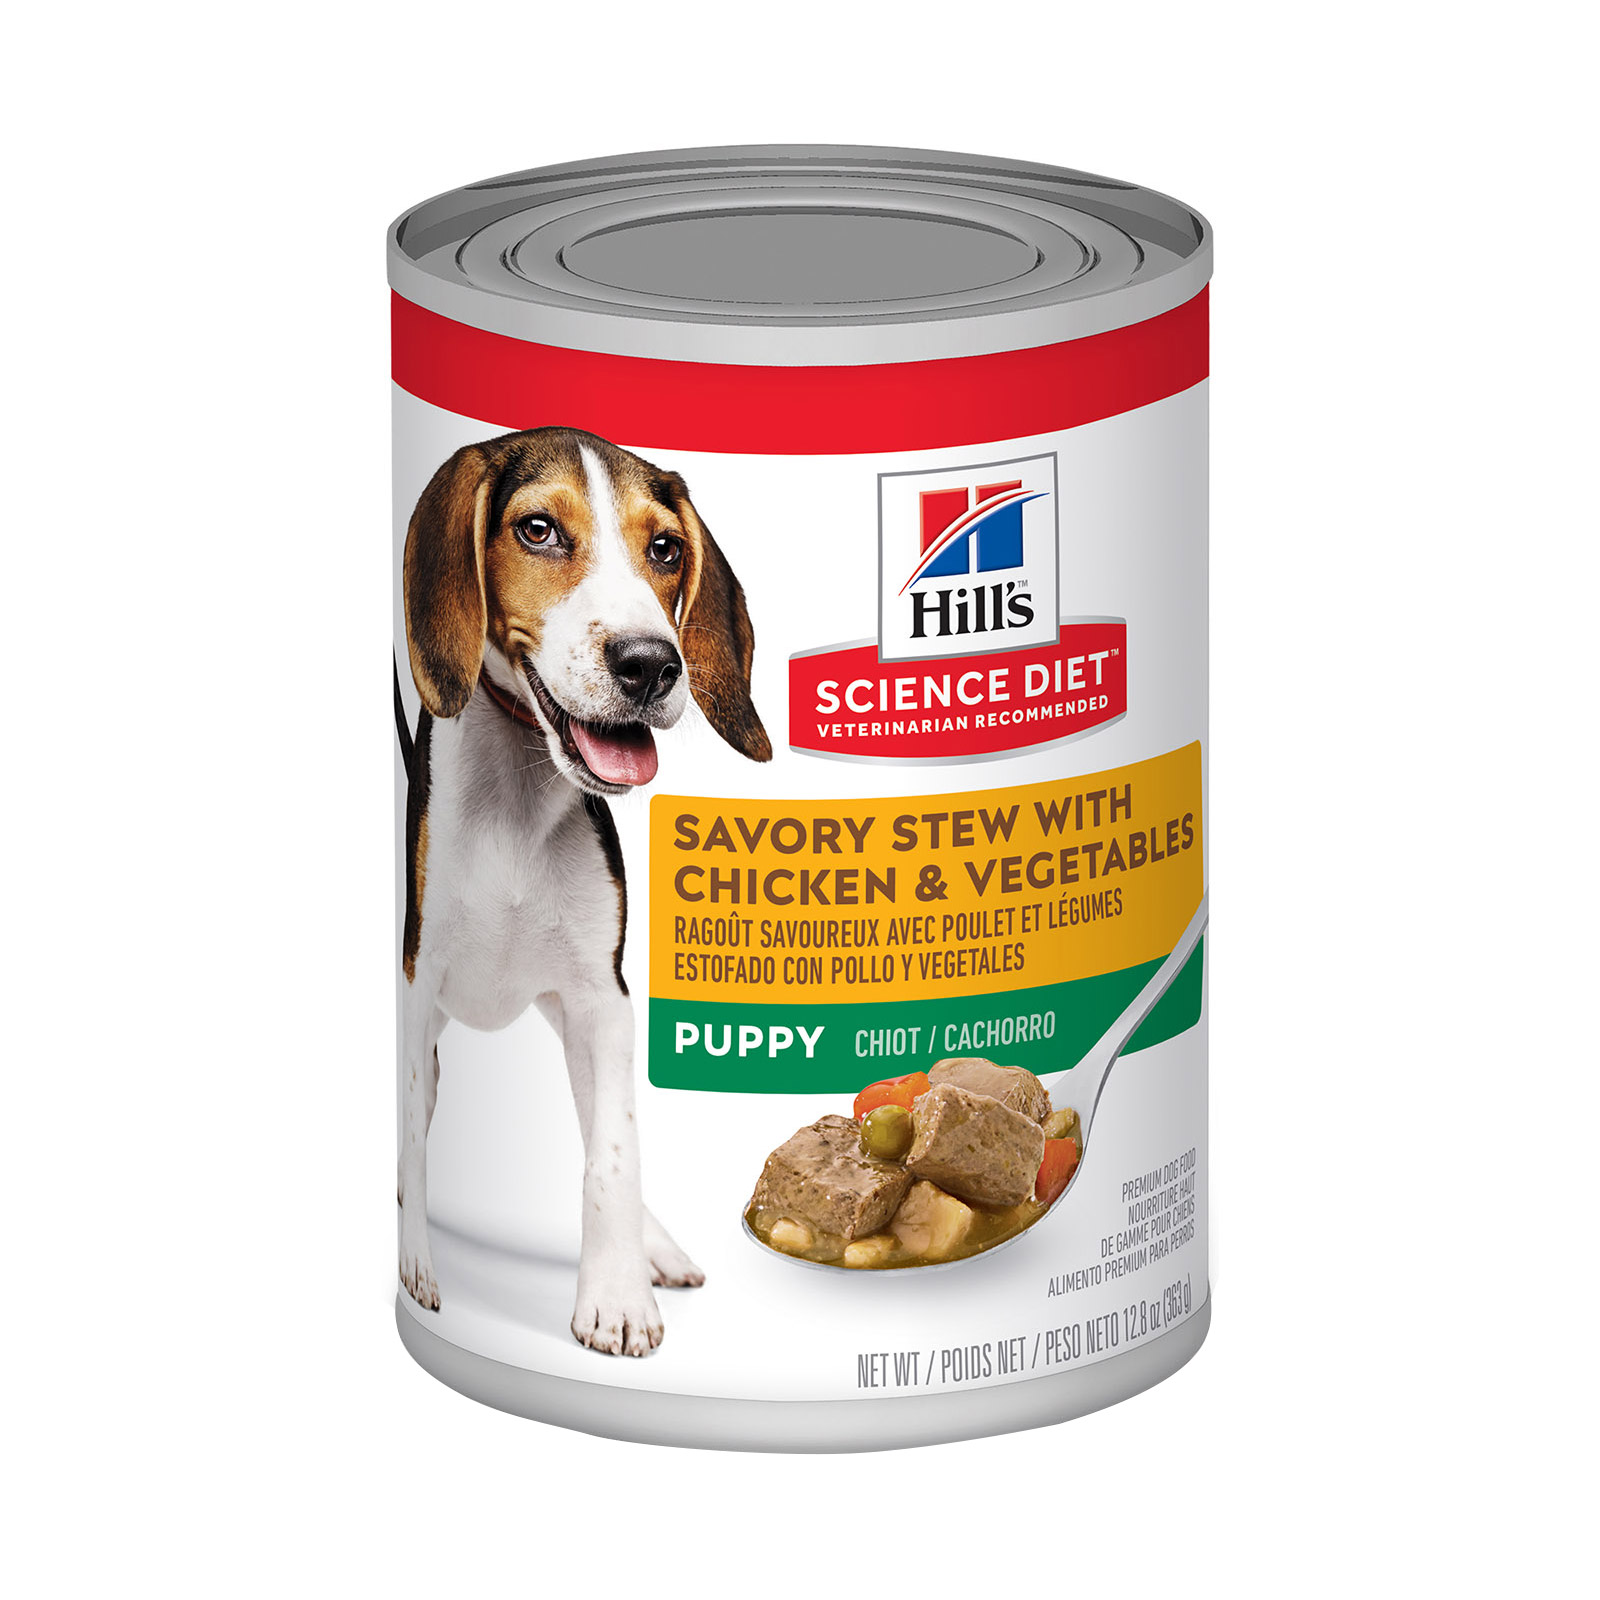 Hill's Science Diet Puppy Savory Stew Chicken & Vegetable Canned Dog Food